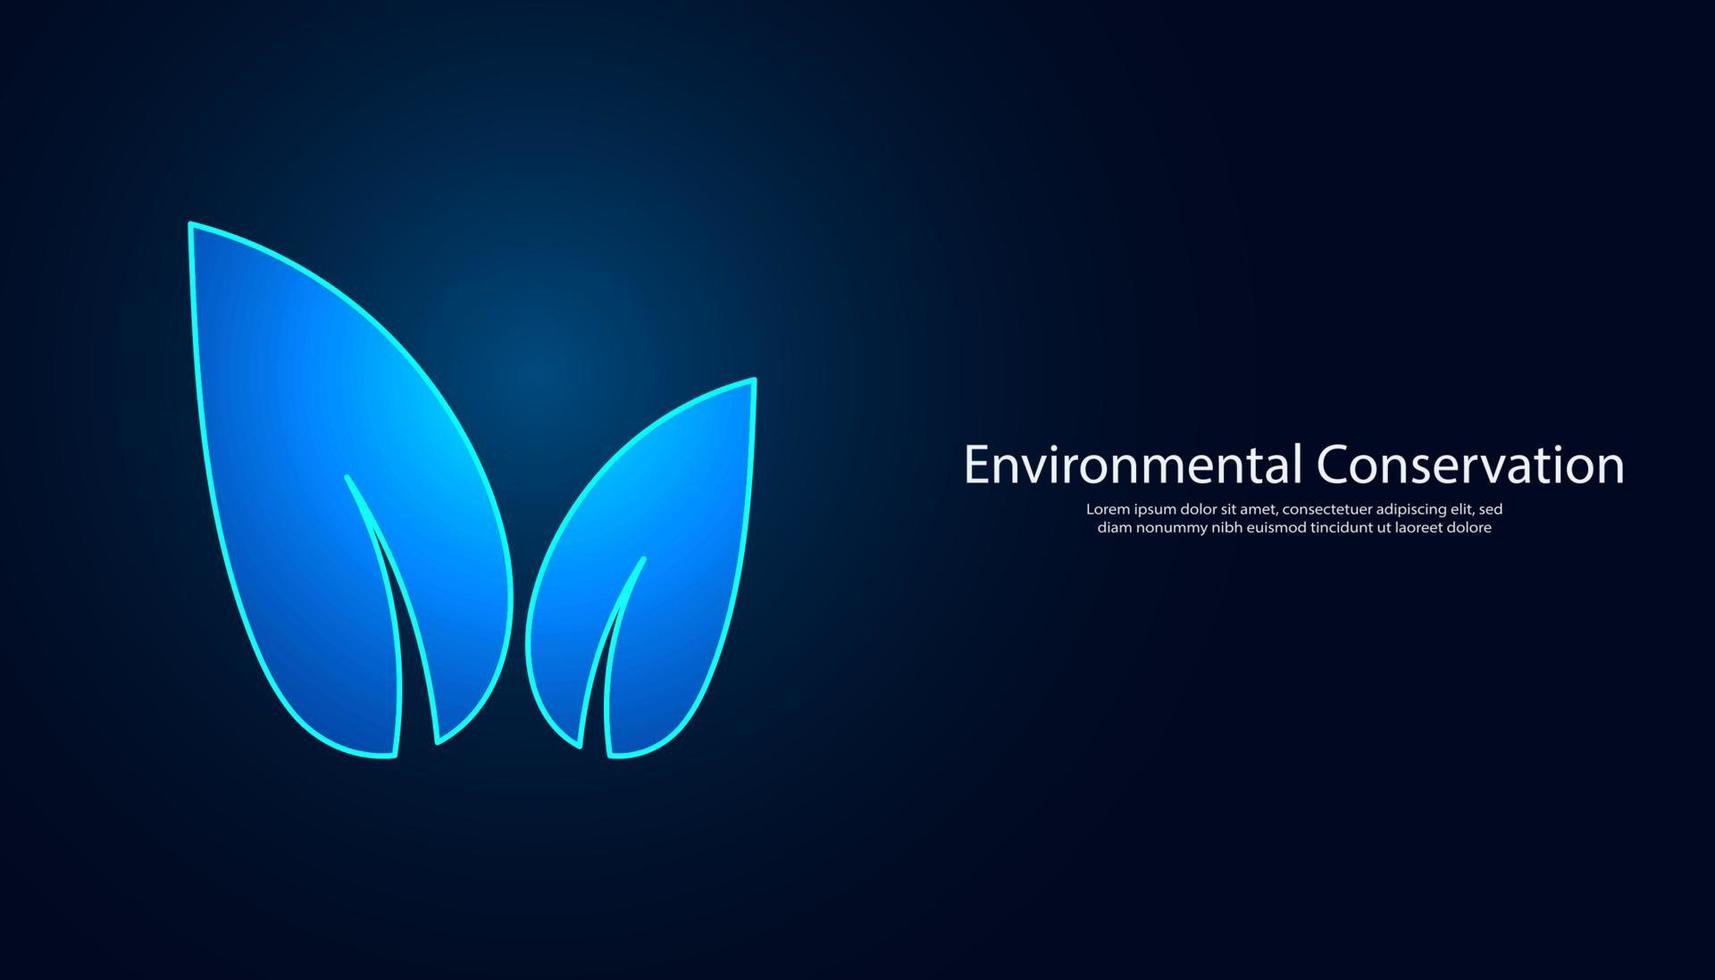 abstract background digital concept leaf symbol environmental protection save earth energy saving modern futuristic dark blue background for text vector